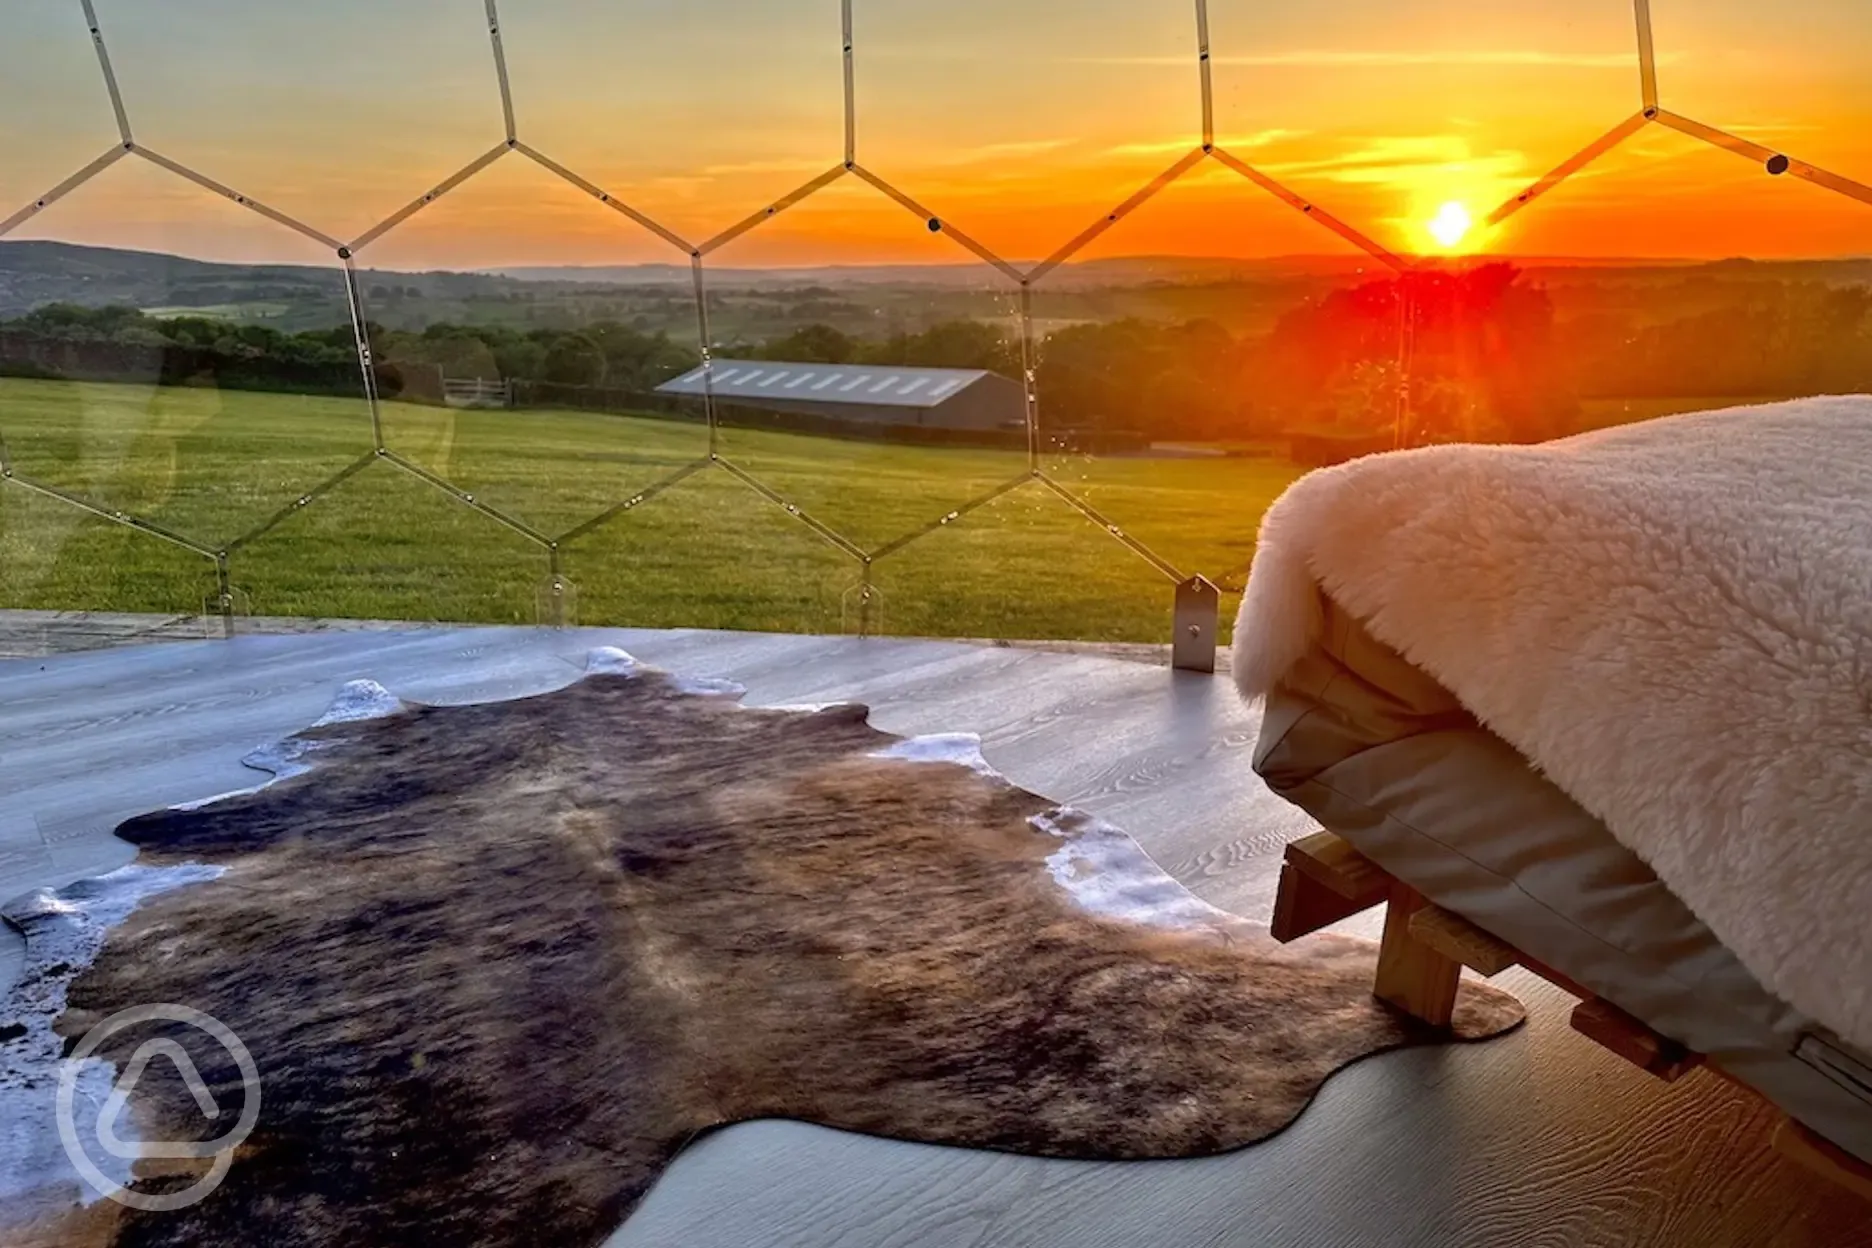 Sunset views from inside the glamping domes